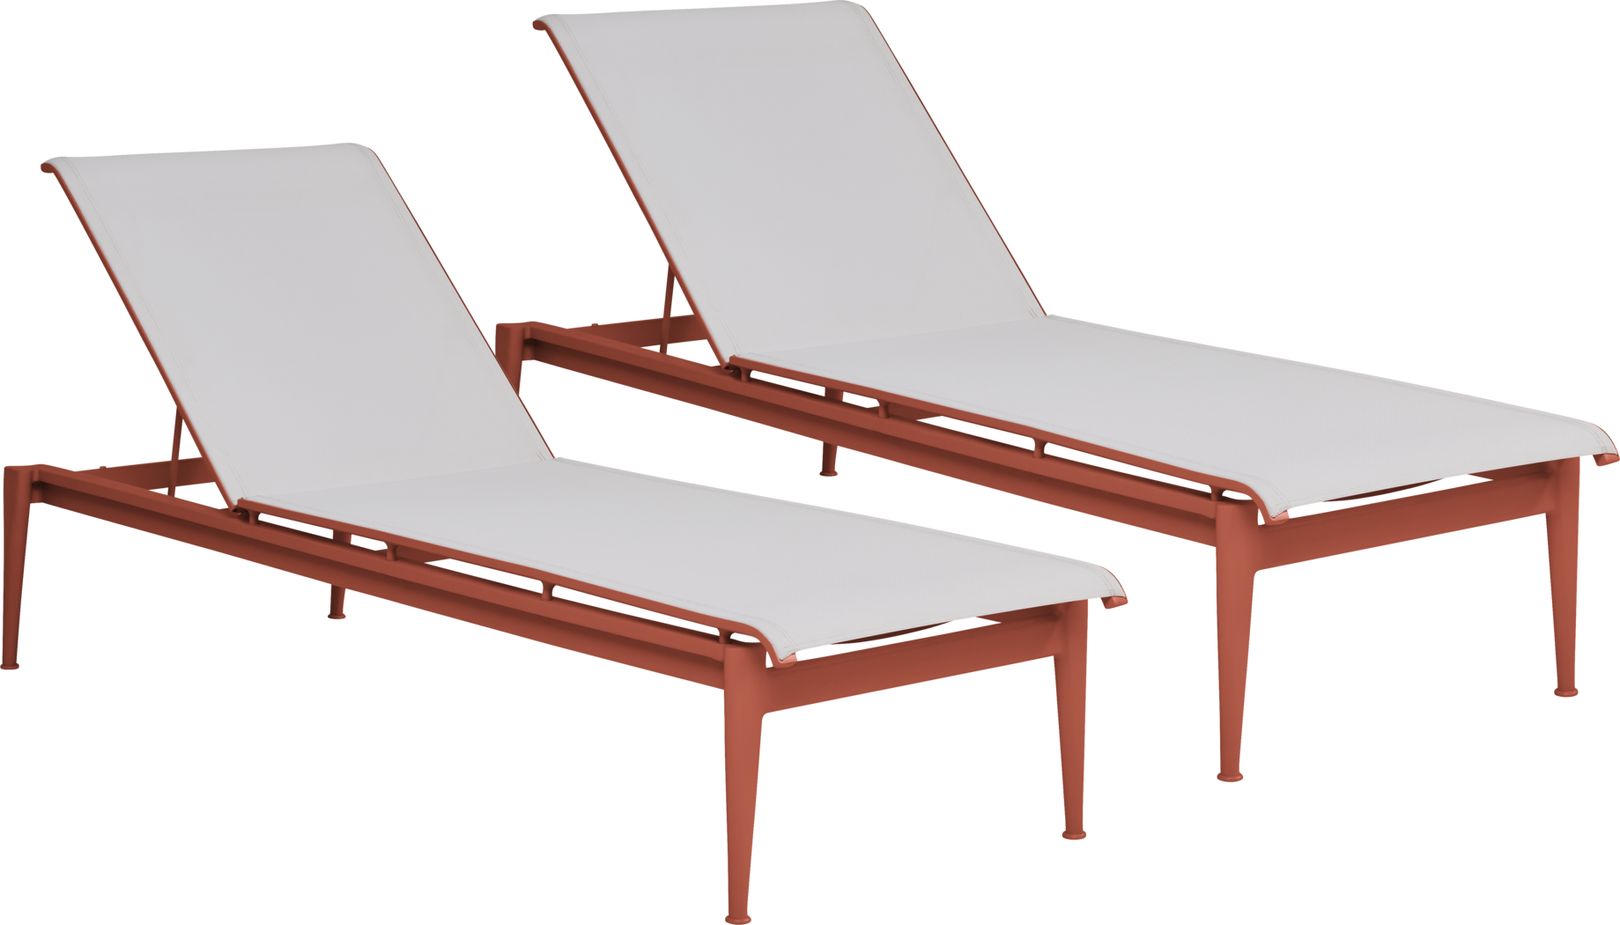 photo of a pair of teak chaise lounges with white sling seats and a table